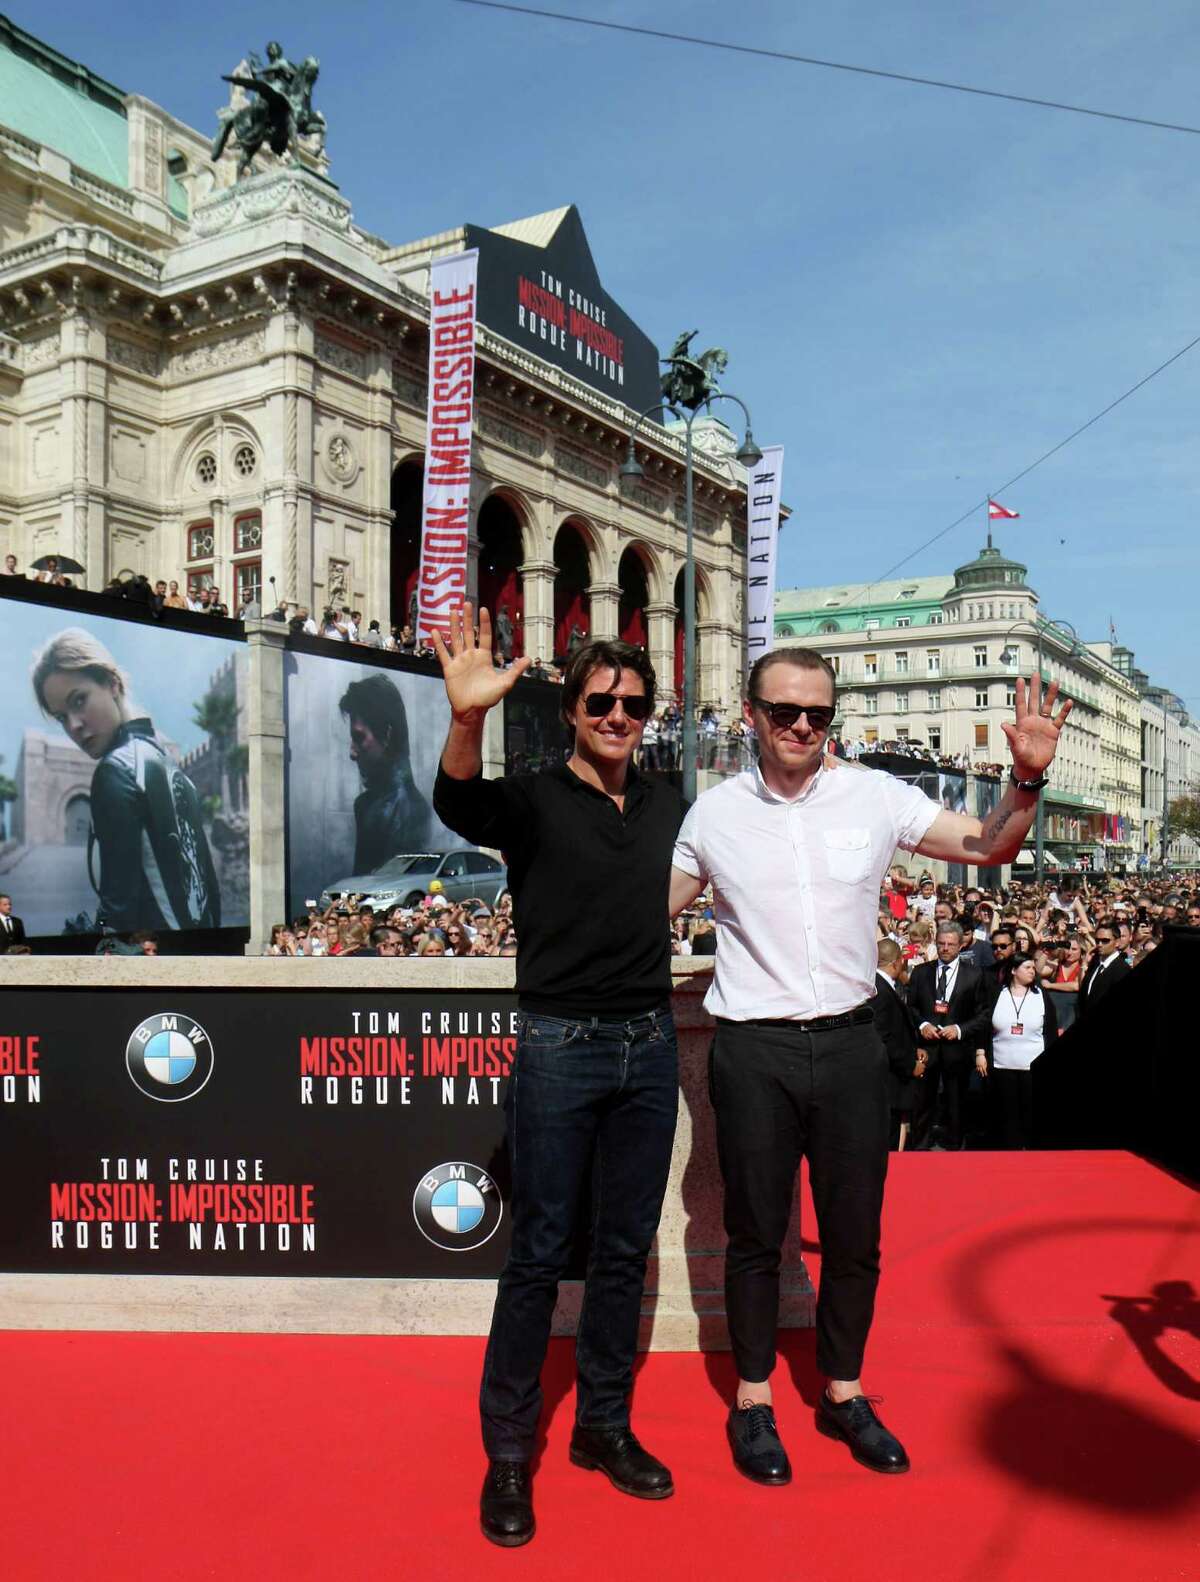 British actor Simon Pegg, right, and US actor Tom Cruise, pose for the media as they arrive for the Mission Impossible ?– Rogue Nation World Premiere, at the Vienna State Opera in Vienna, Austria, Thursday, July 23, 2015. (AP Photo/Ronald Zak) ORG XMIT: XRZ108